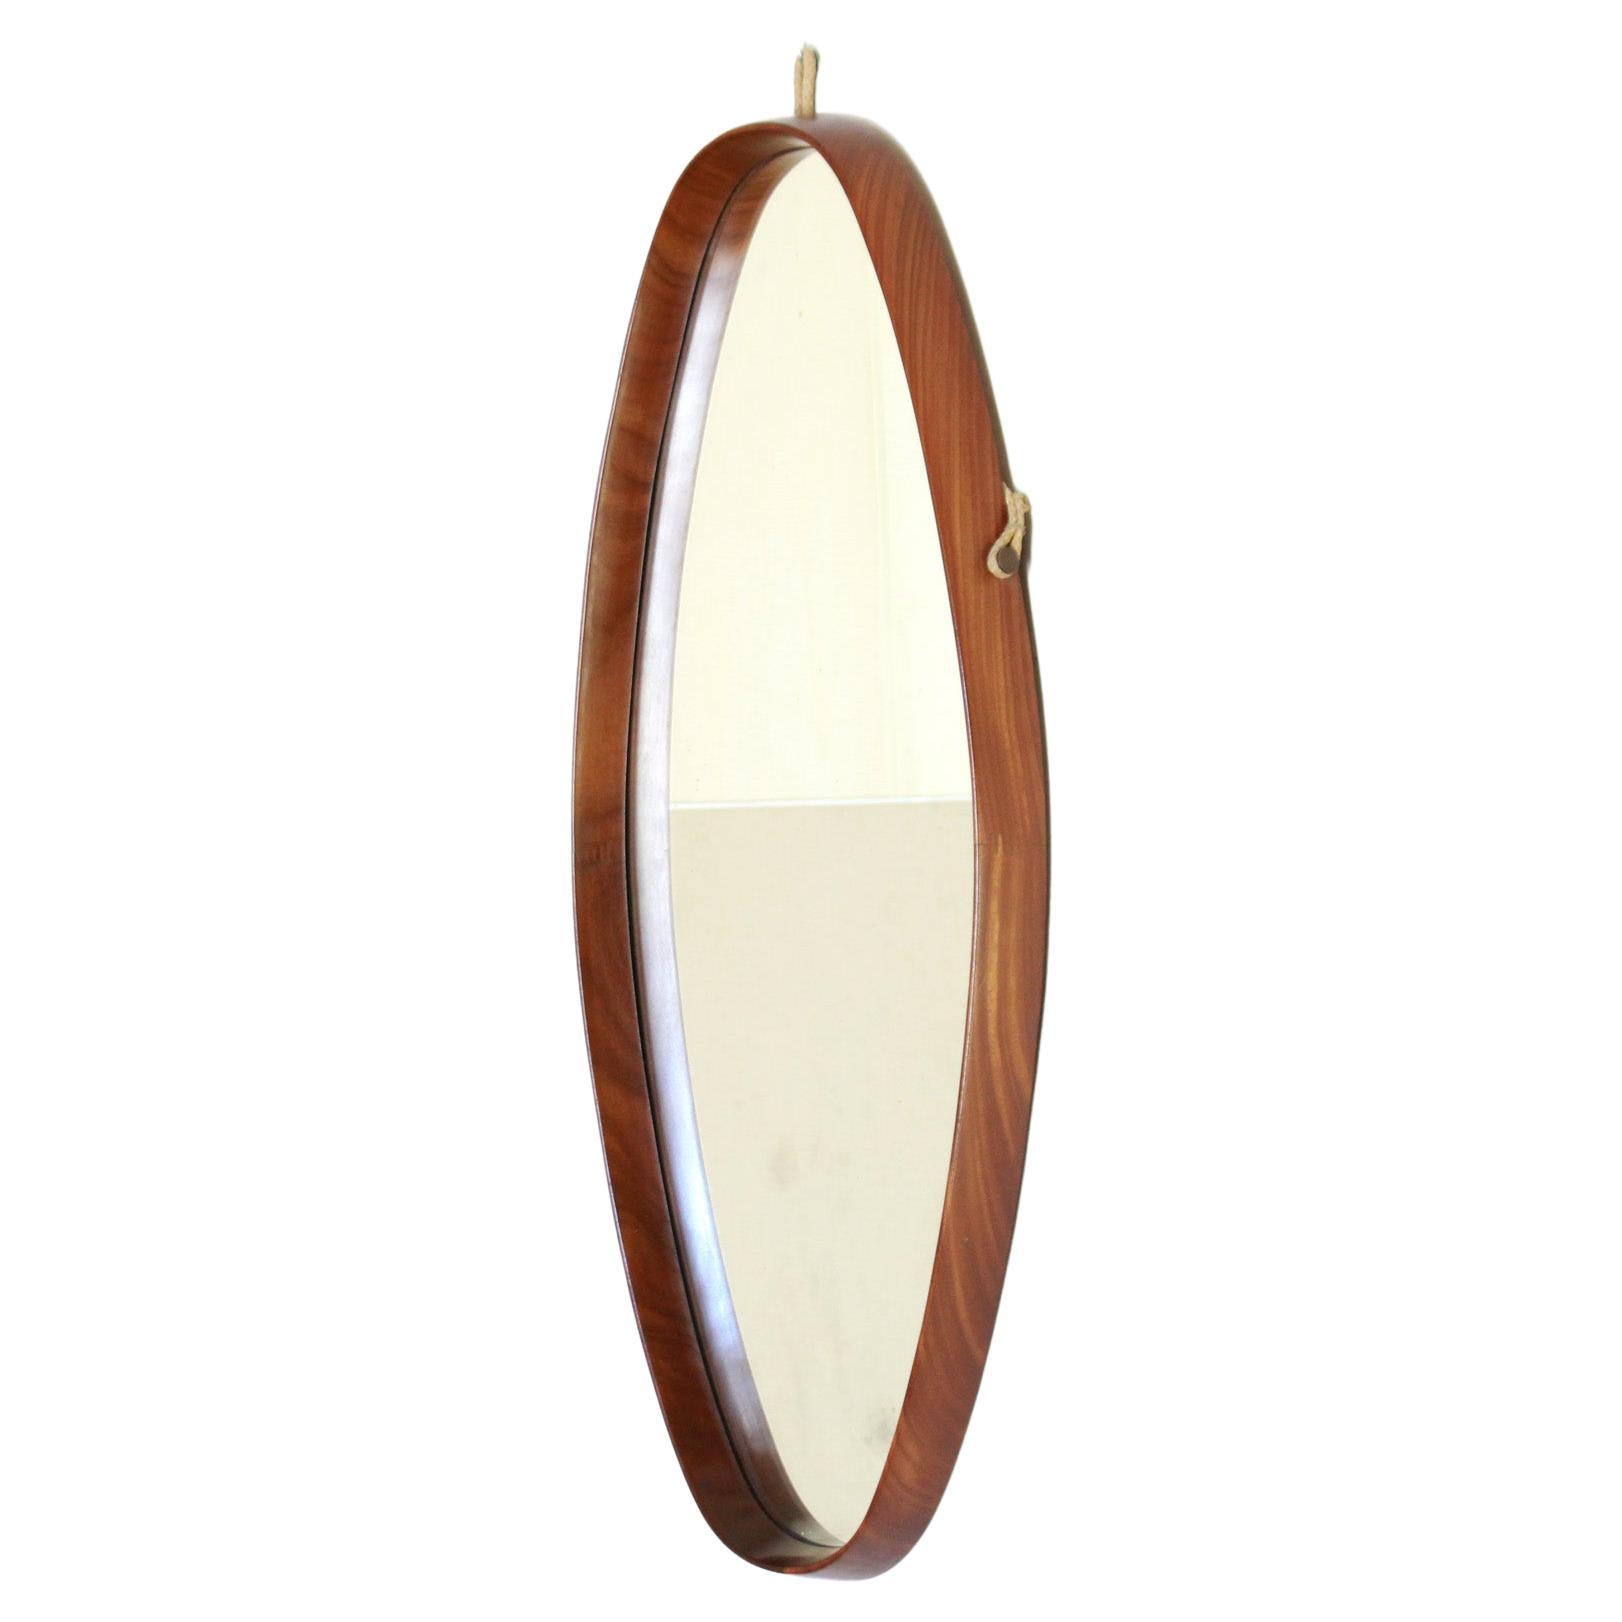 1960s Vintage Oval Wall Mirror with Teak Frame